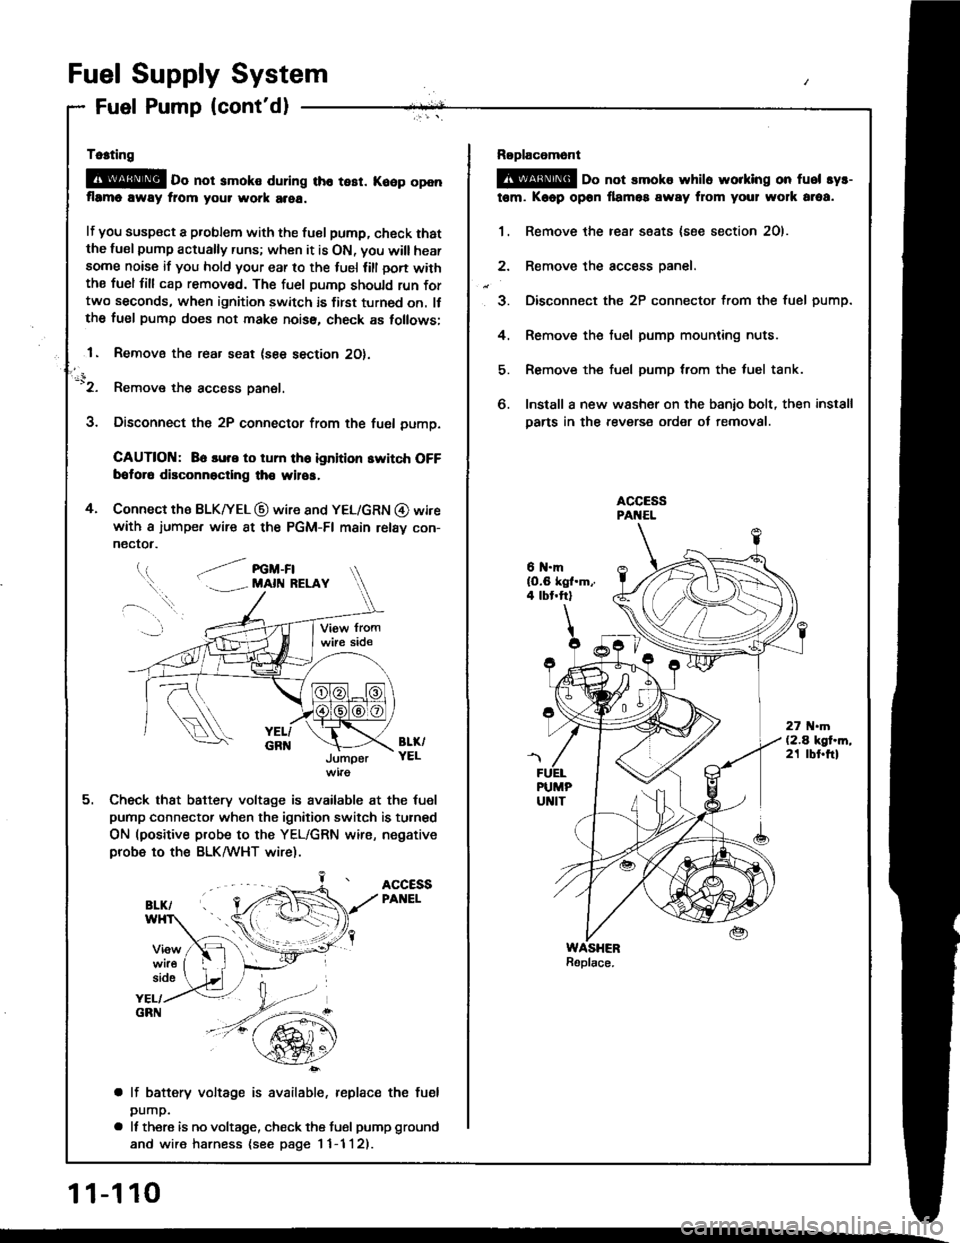 HONDA INTEGRA 1994 4.G Workshop Manual Fuel Supply System
Fuel Pump (contdl
Tc.ting
@E o" not smoko during tho tesr. Koop openflrmo away fiom your work area.
lf you susp€ct a problem with the tuel pump, check thatthe lusl pump actually 